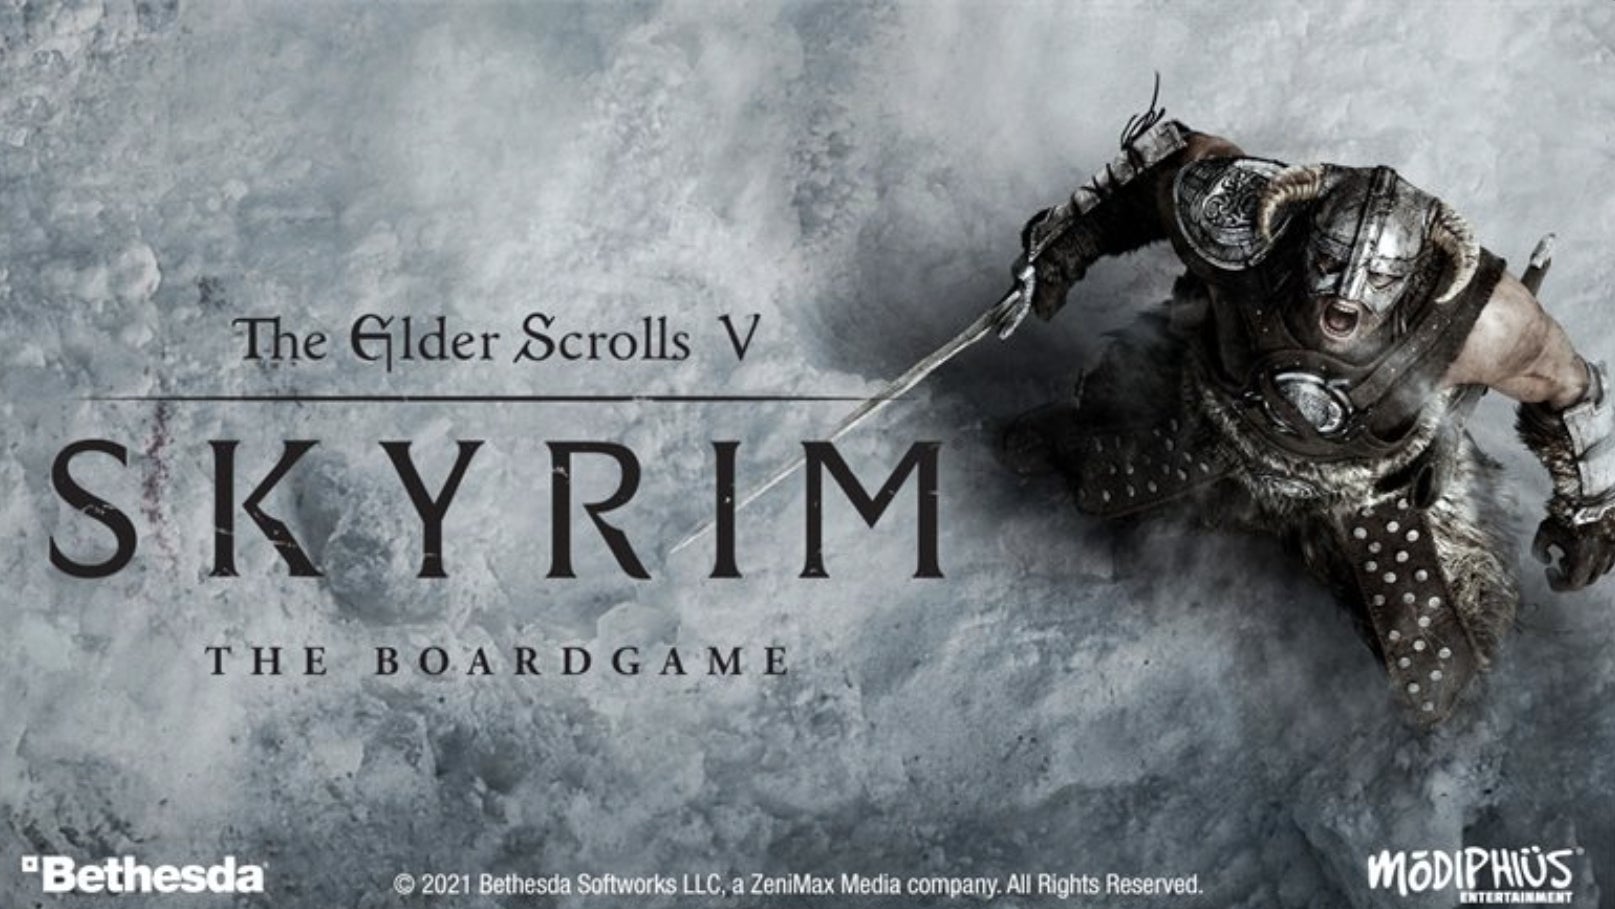 Image for There's a Skyrim "adventure board game" on the way